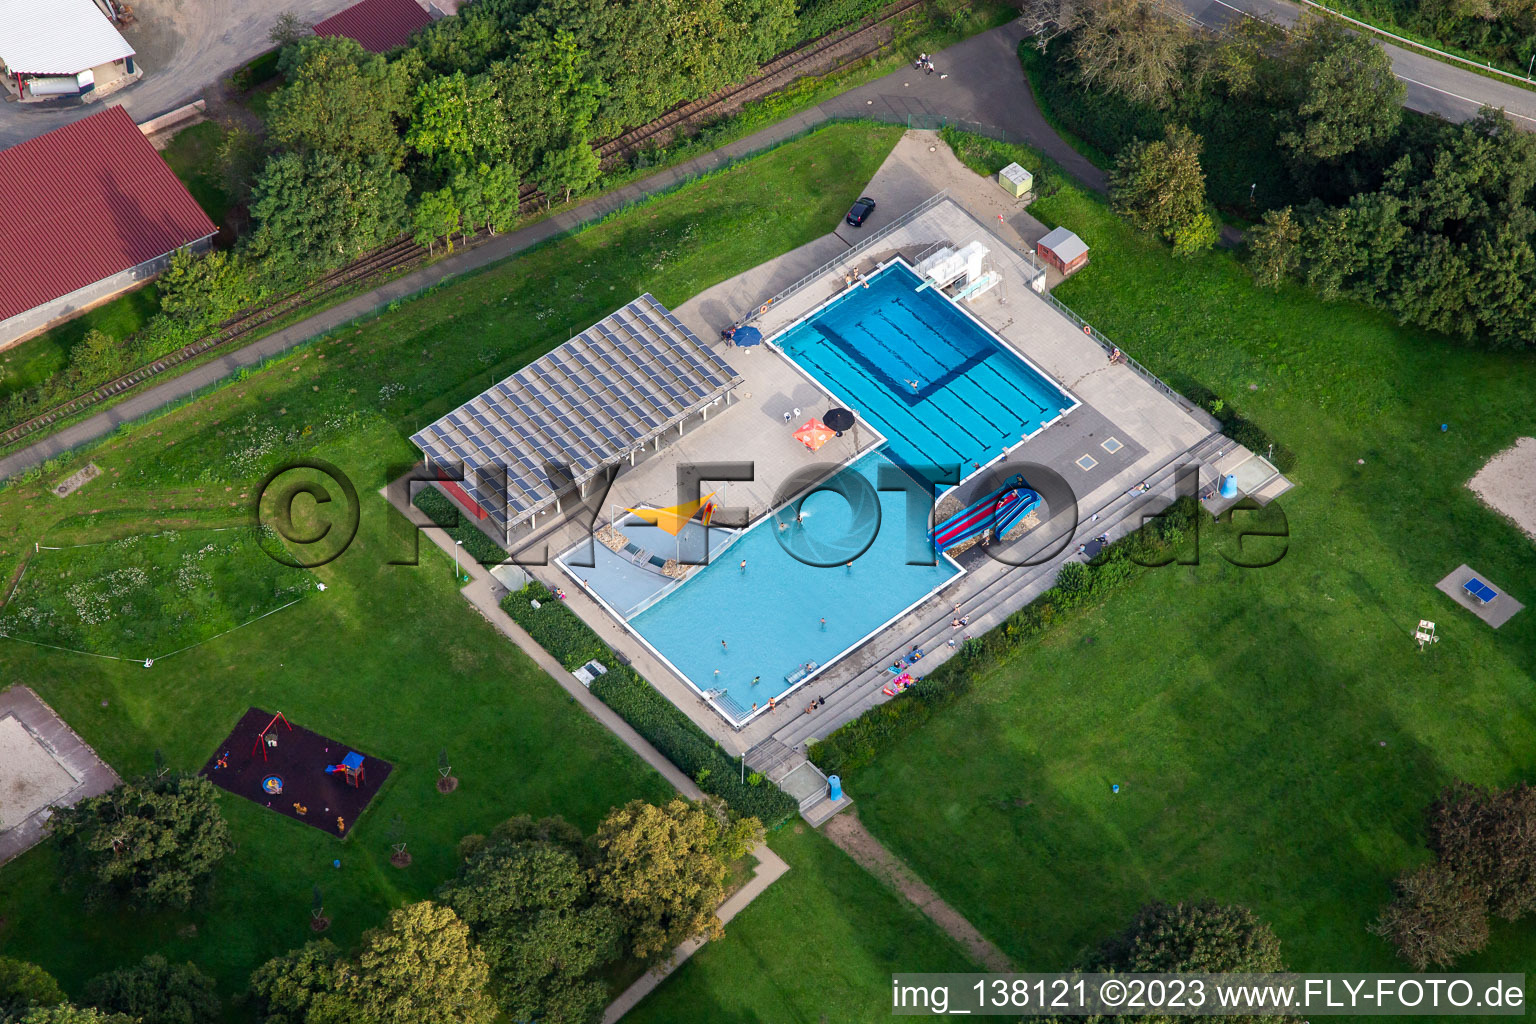 Outdoor pool "In the Heimbac in Meisenheim in the state Rhineland-Palatinate, Germany